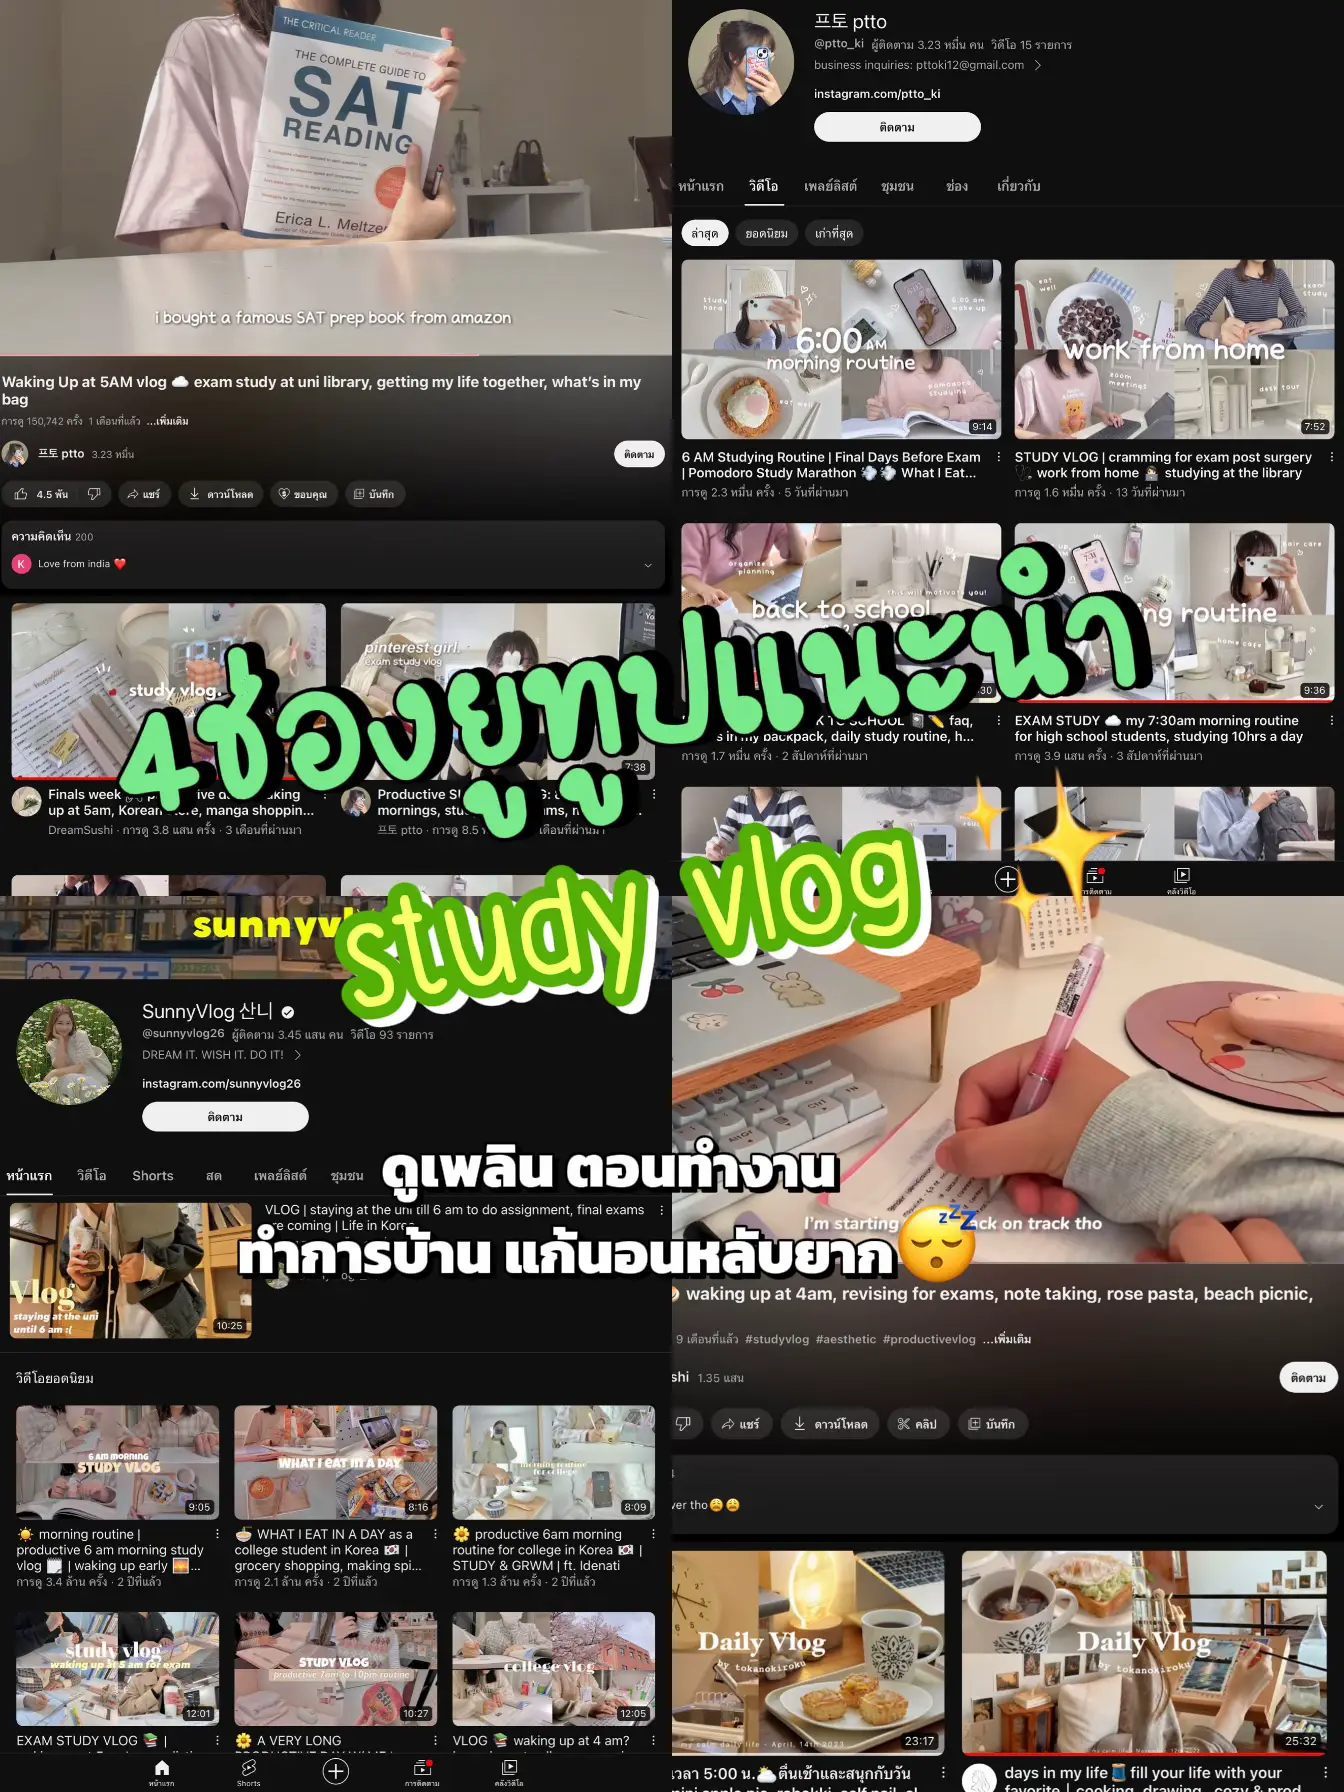 channel studying Vlog is diligent, Gallery posted by 𝐵𝑒𝑟𝑙𝑖𝑛  𝘑𝘪